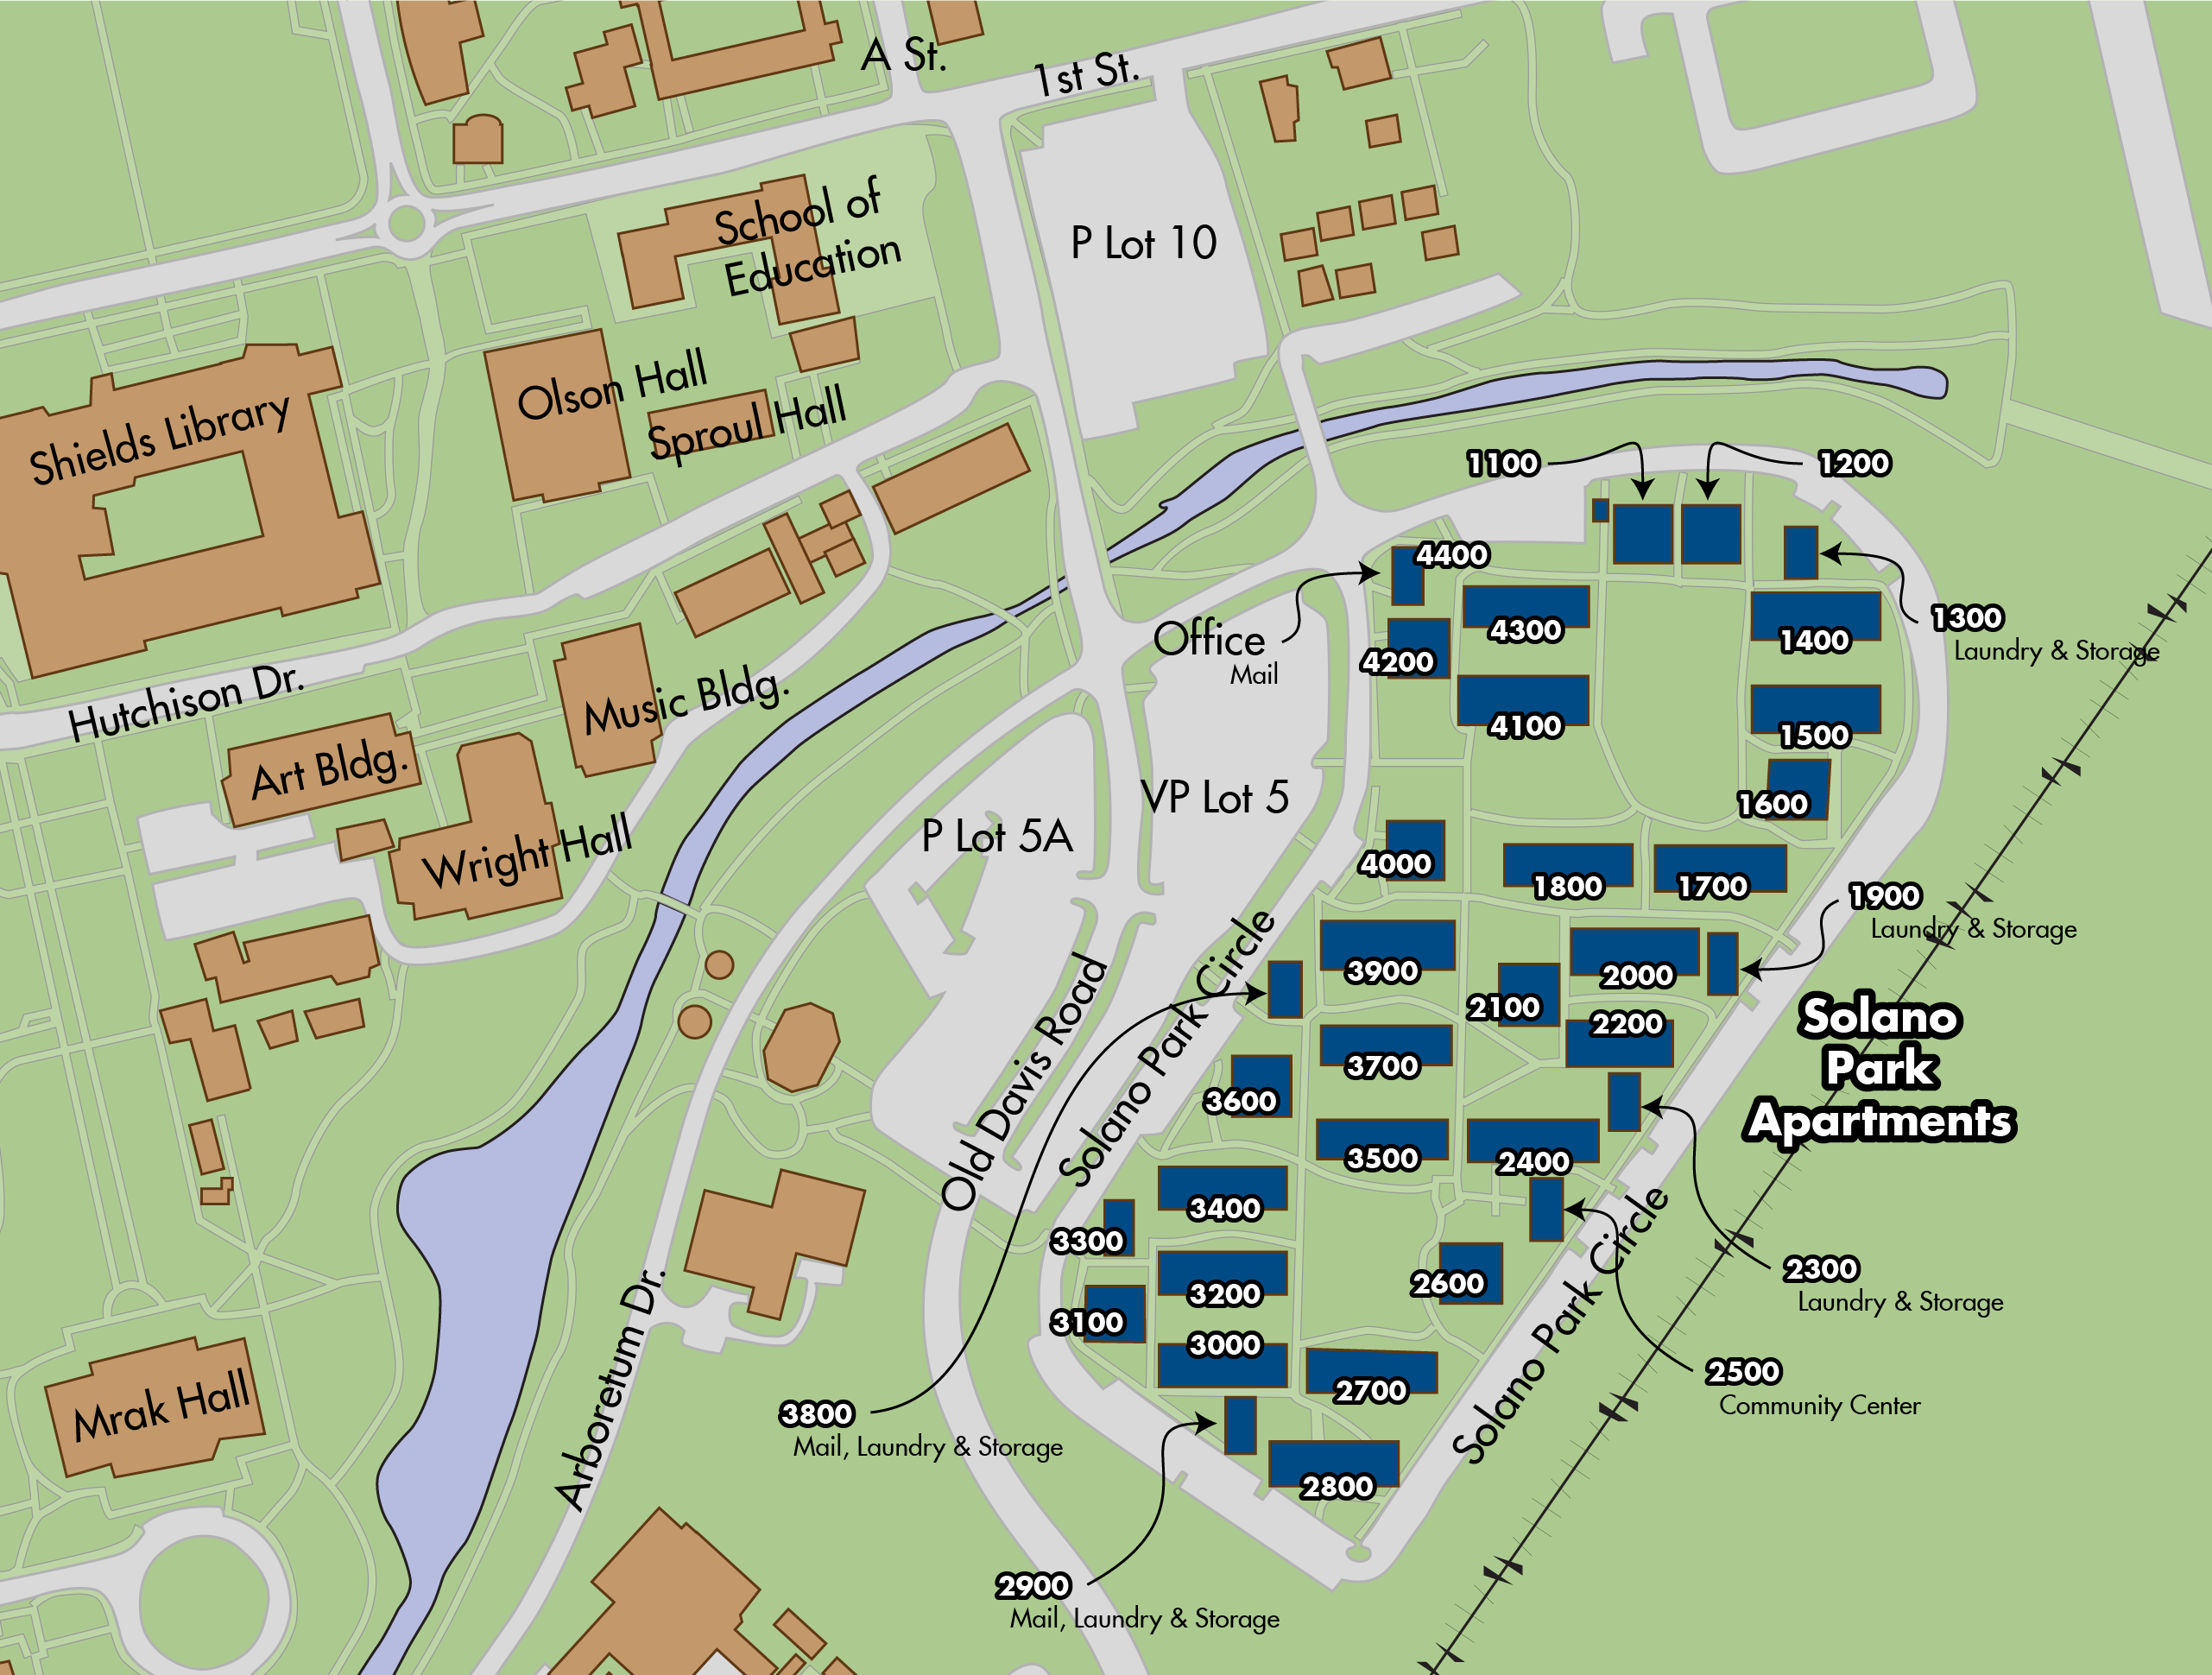 Map of Solano Park apartments locations on the UC Davis campus